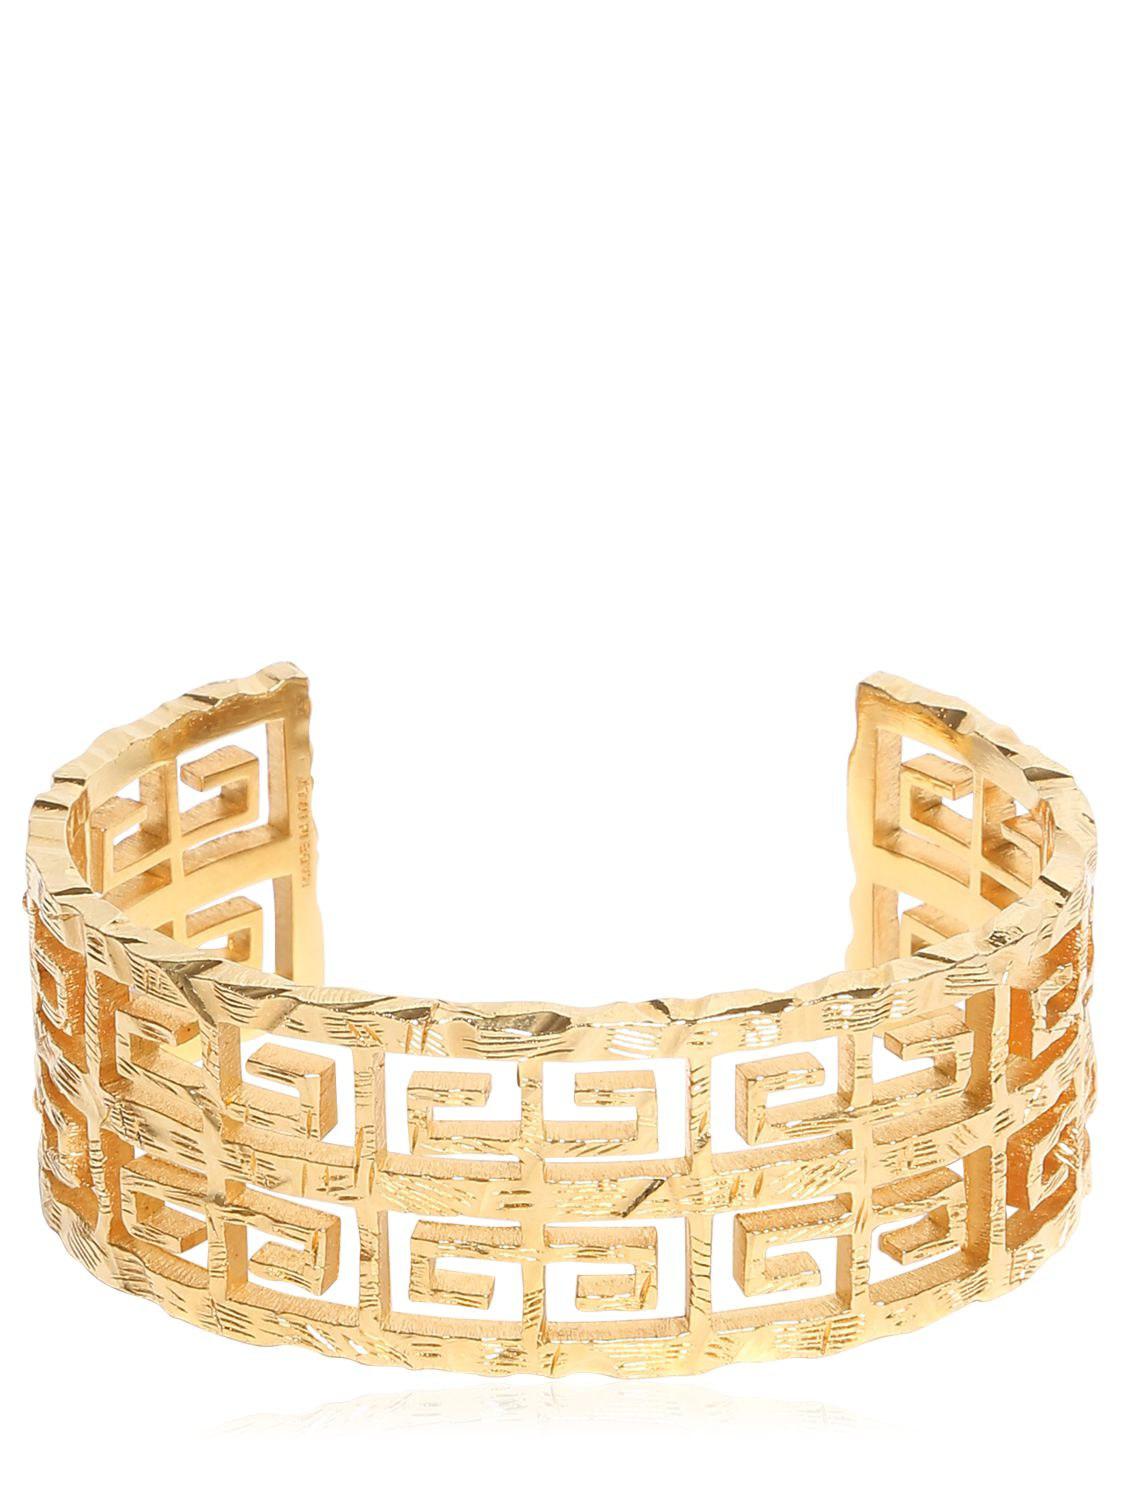 Givenchy 4g Bracelet in Gold (Metallic) - Lyst